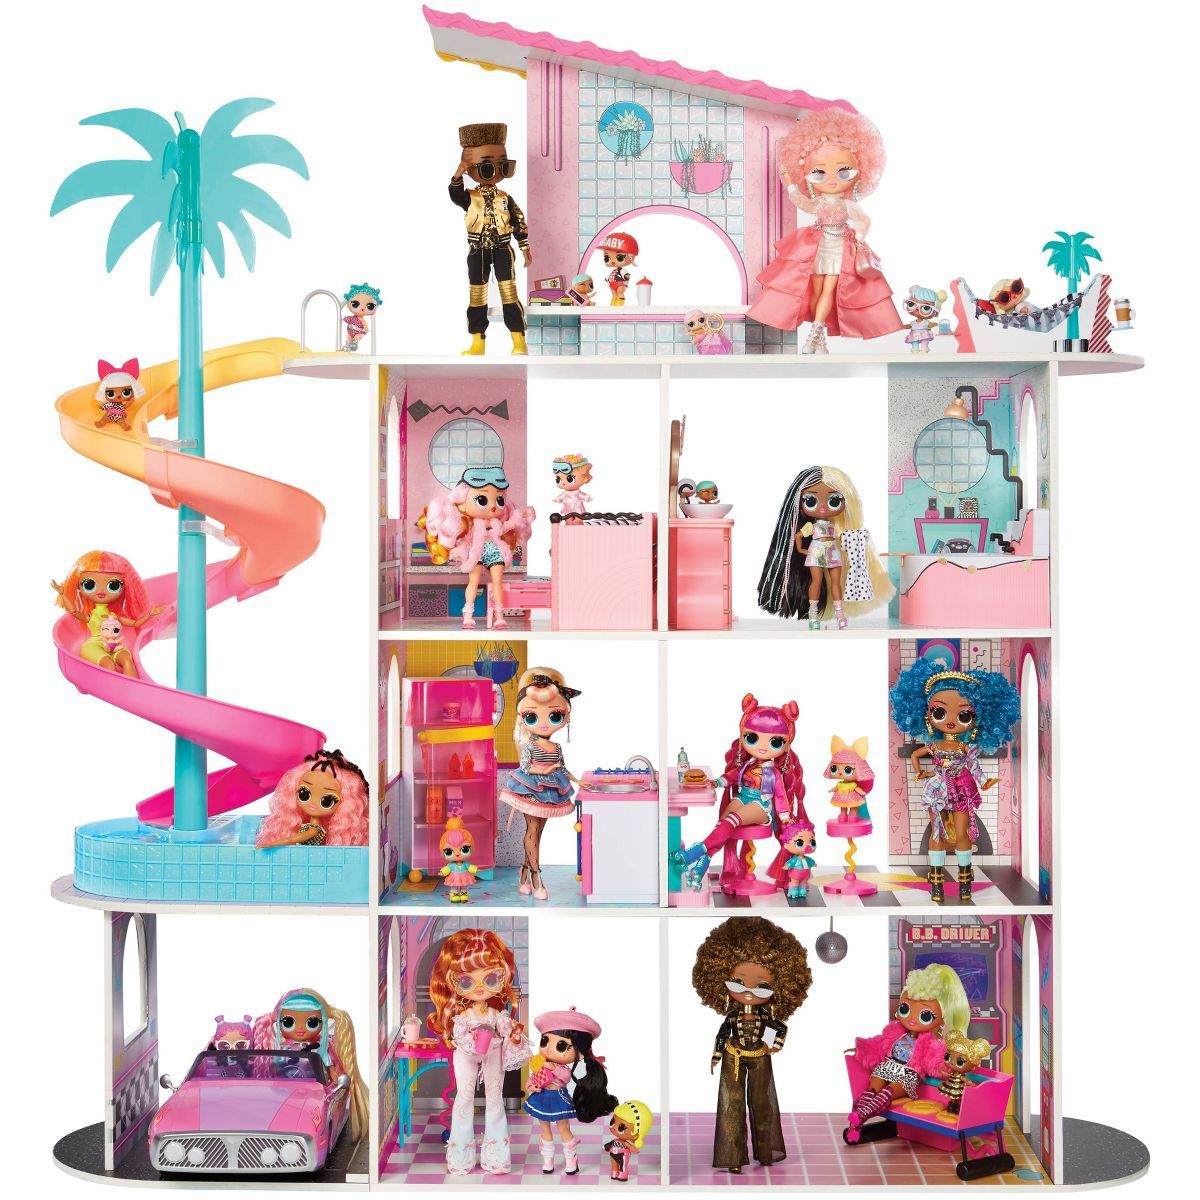 L.O.L. Surprise! OMG Fashion House Playset with 85+ Surprises | Target